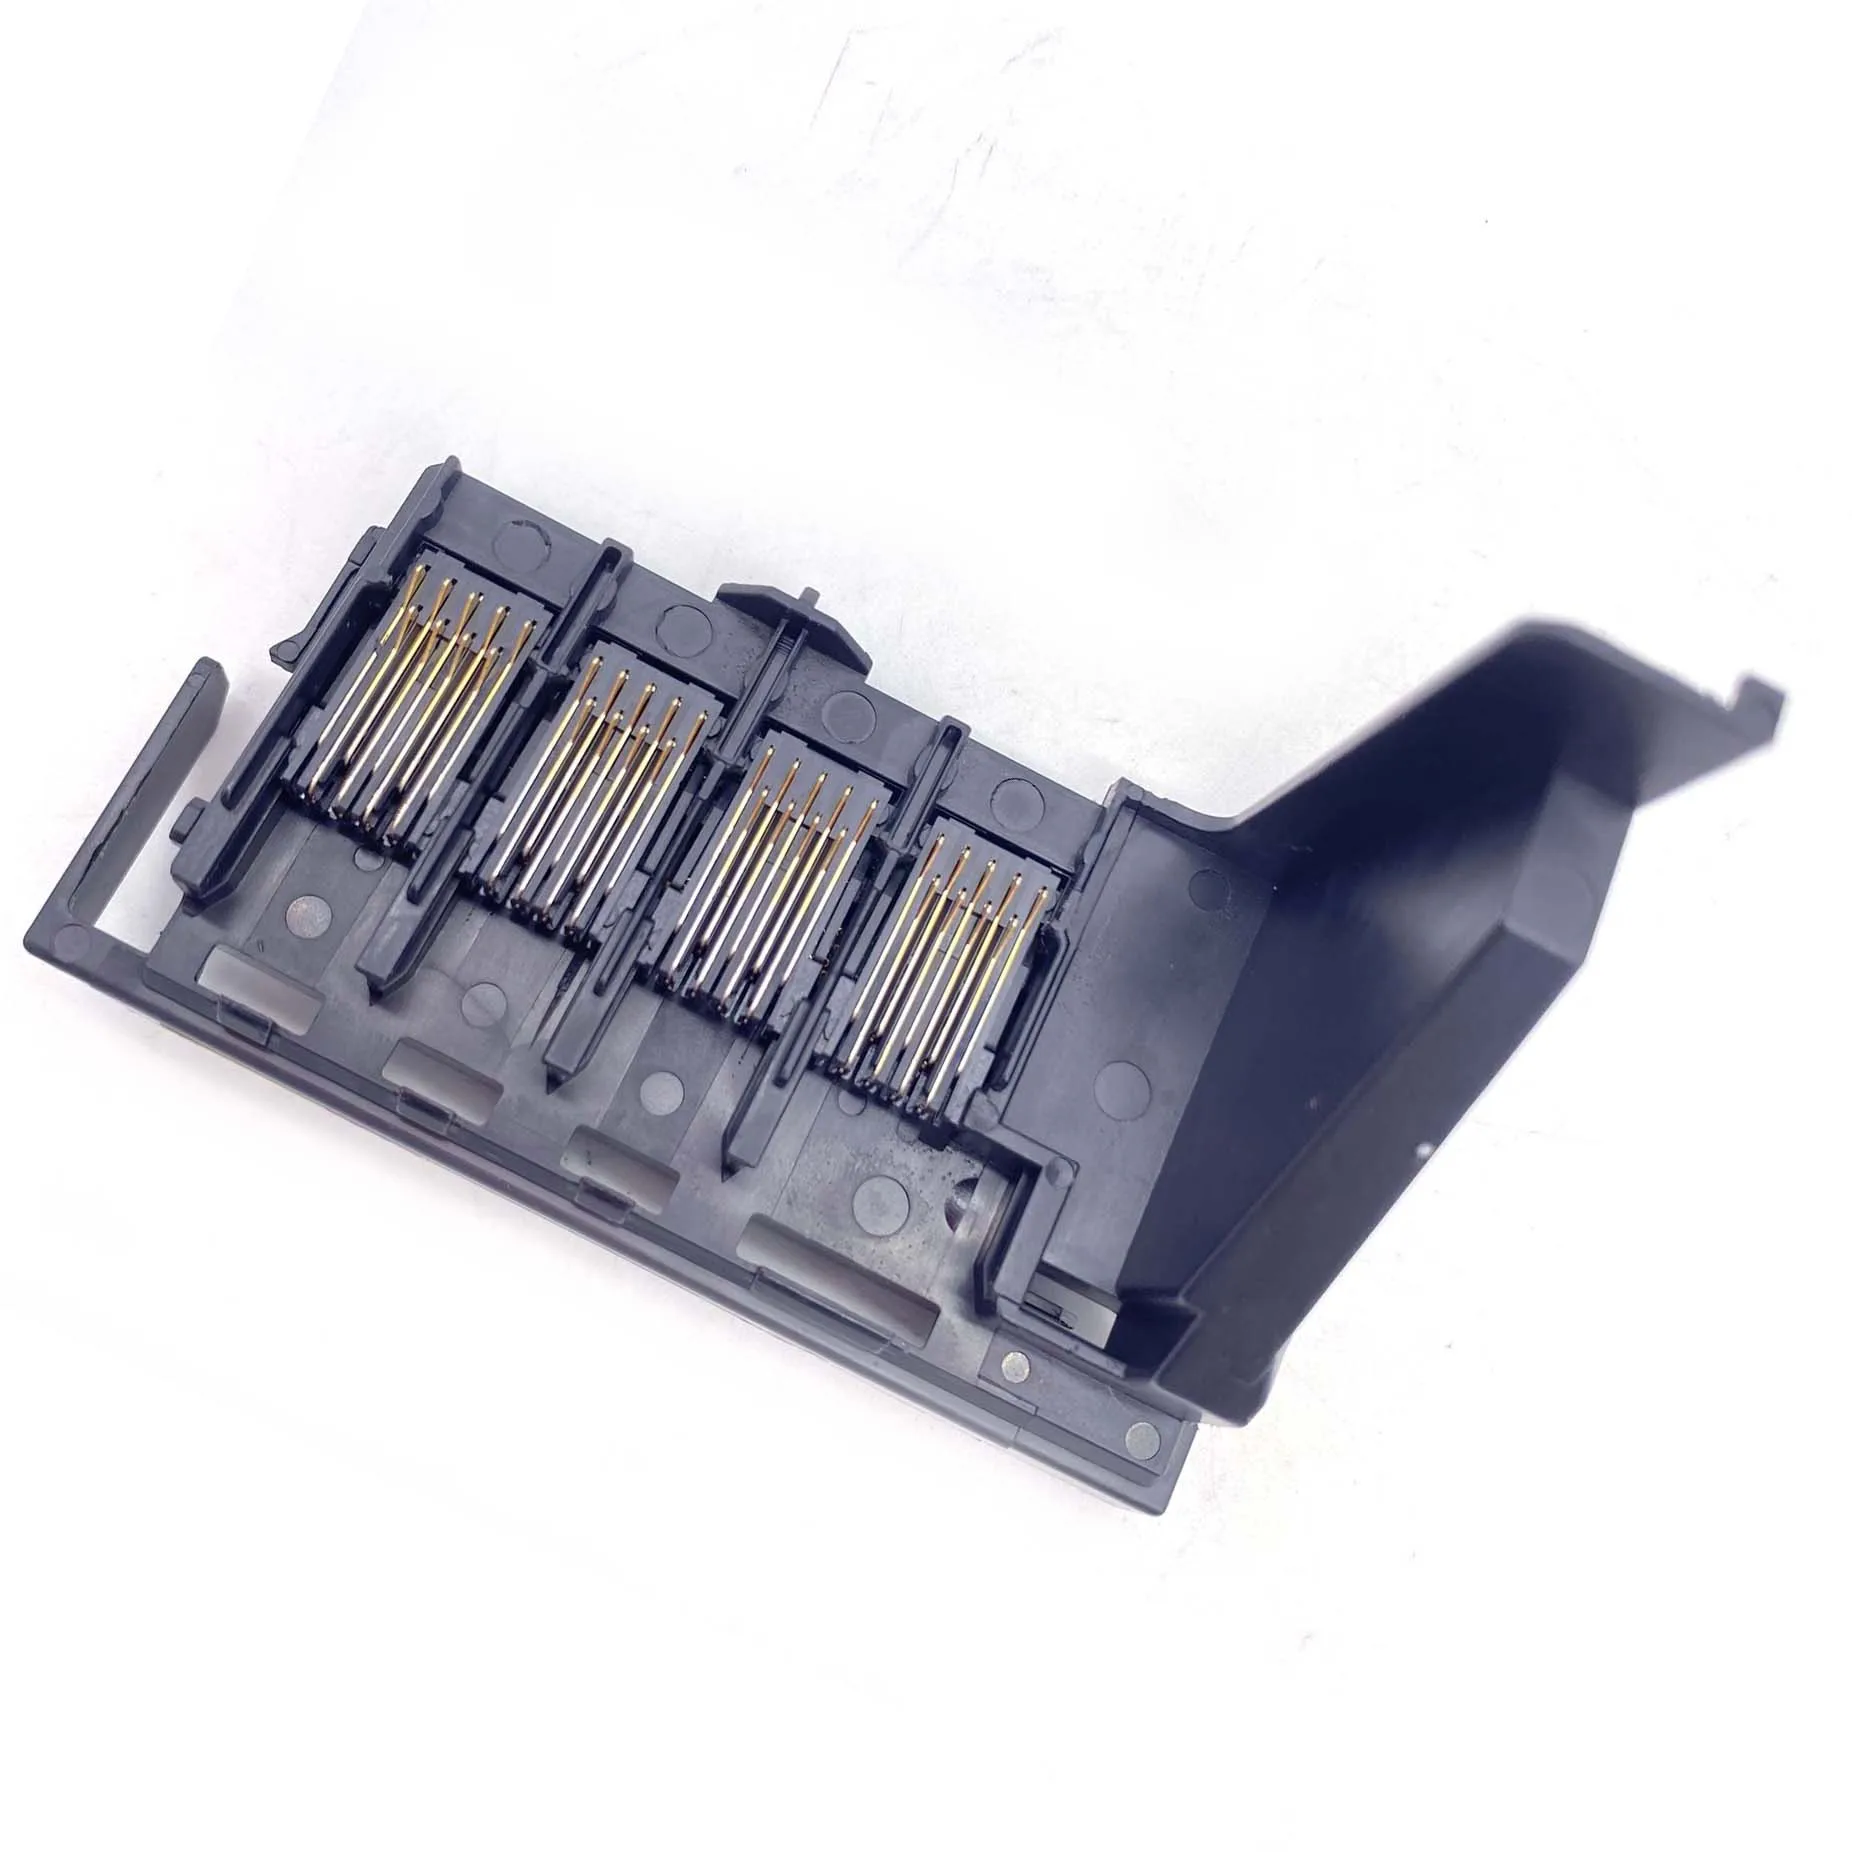 

Cartridge Detection Board fits for EPSON WF-2750 WF-2661 WF2650 WF-2660 2650 WF2660 WF2651 WF2750 WF-2651 2750 WF2661